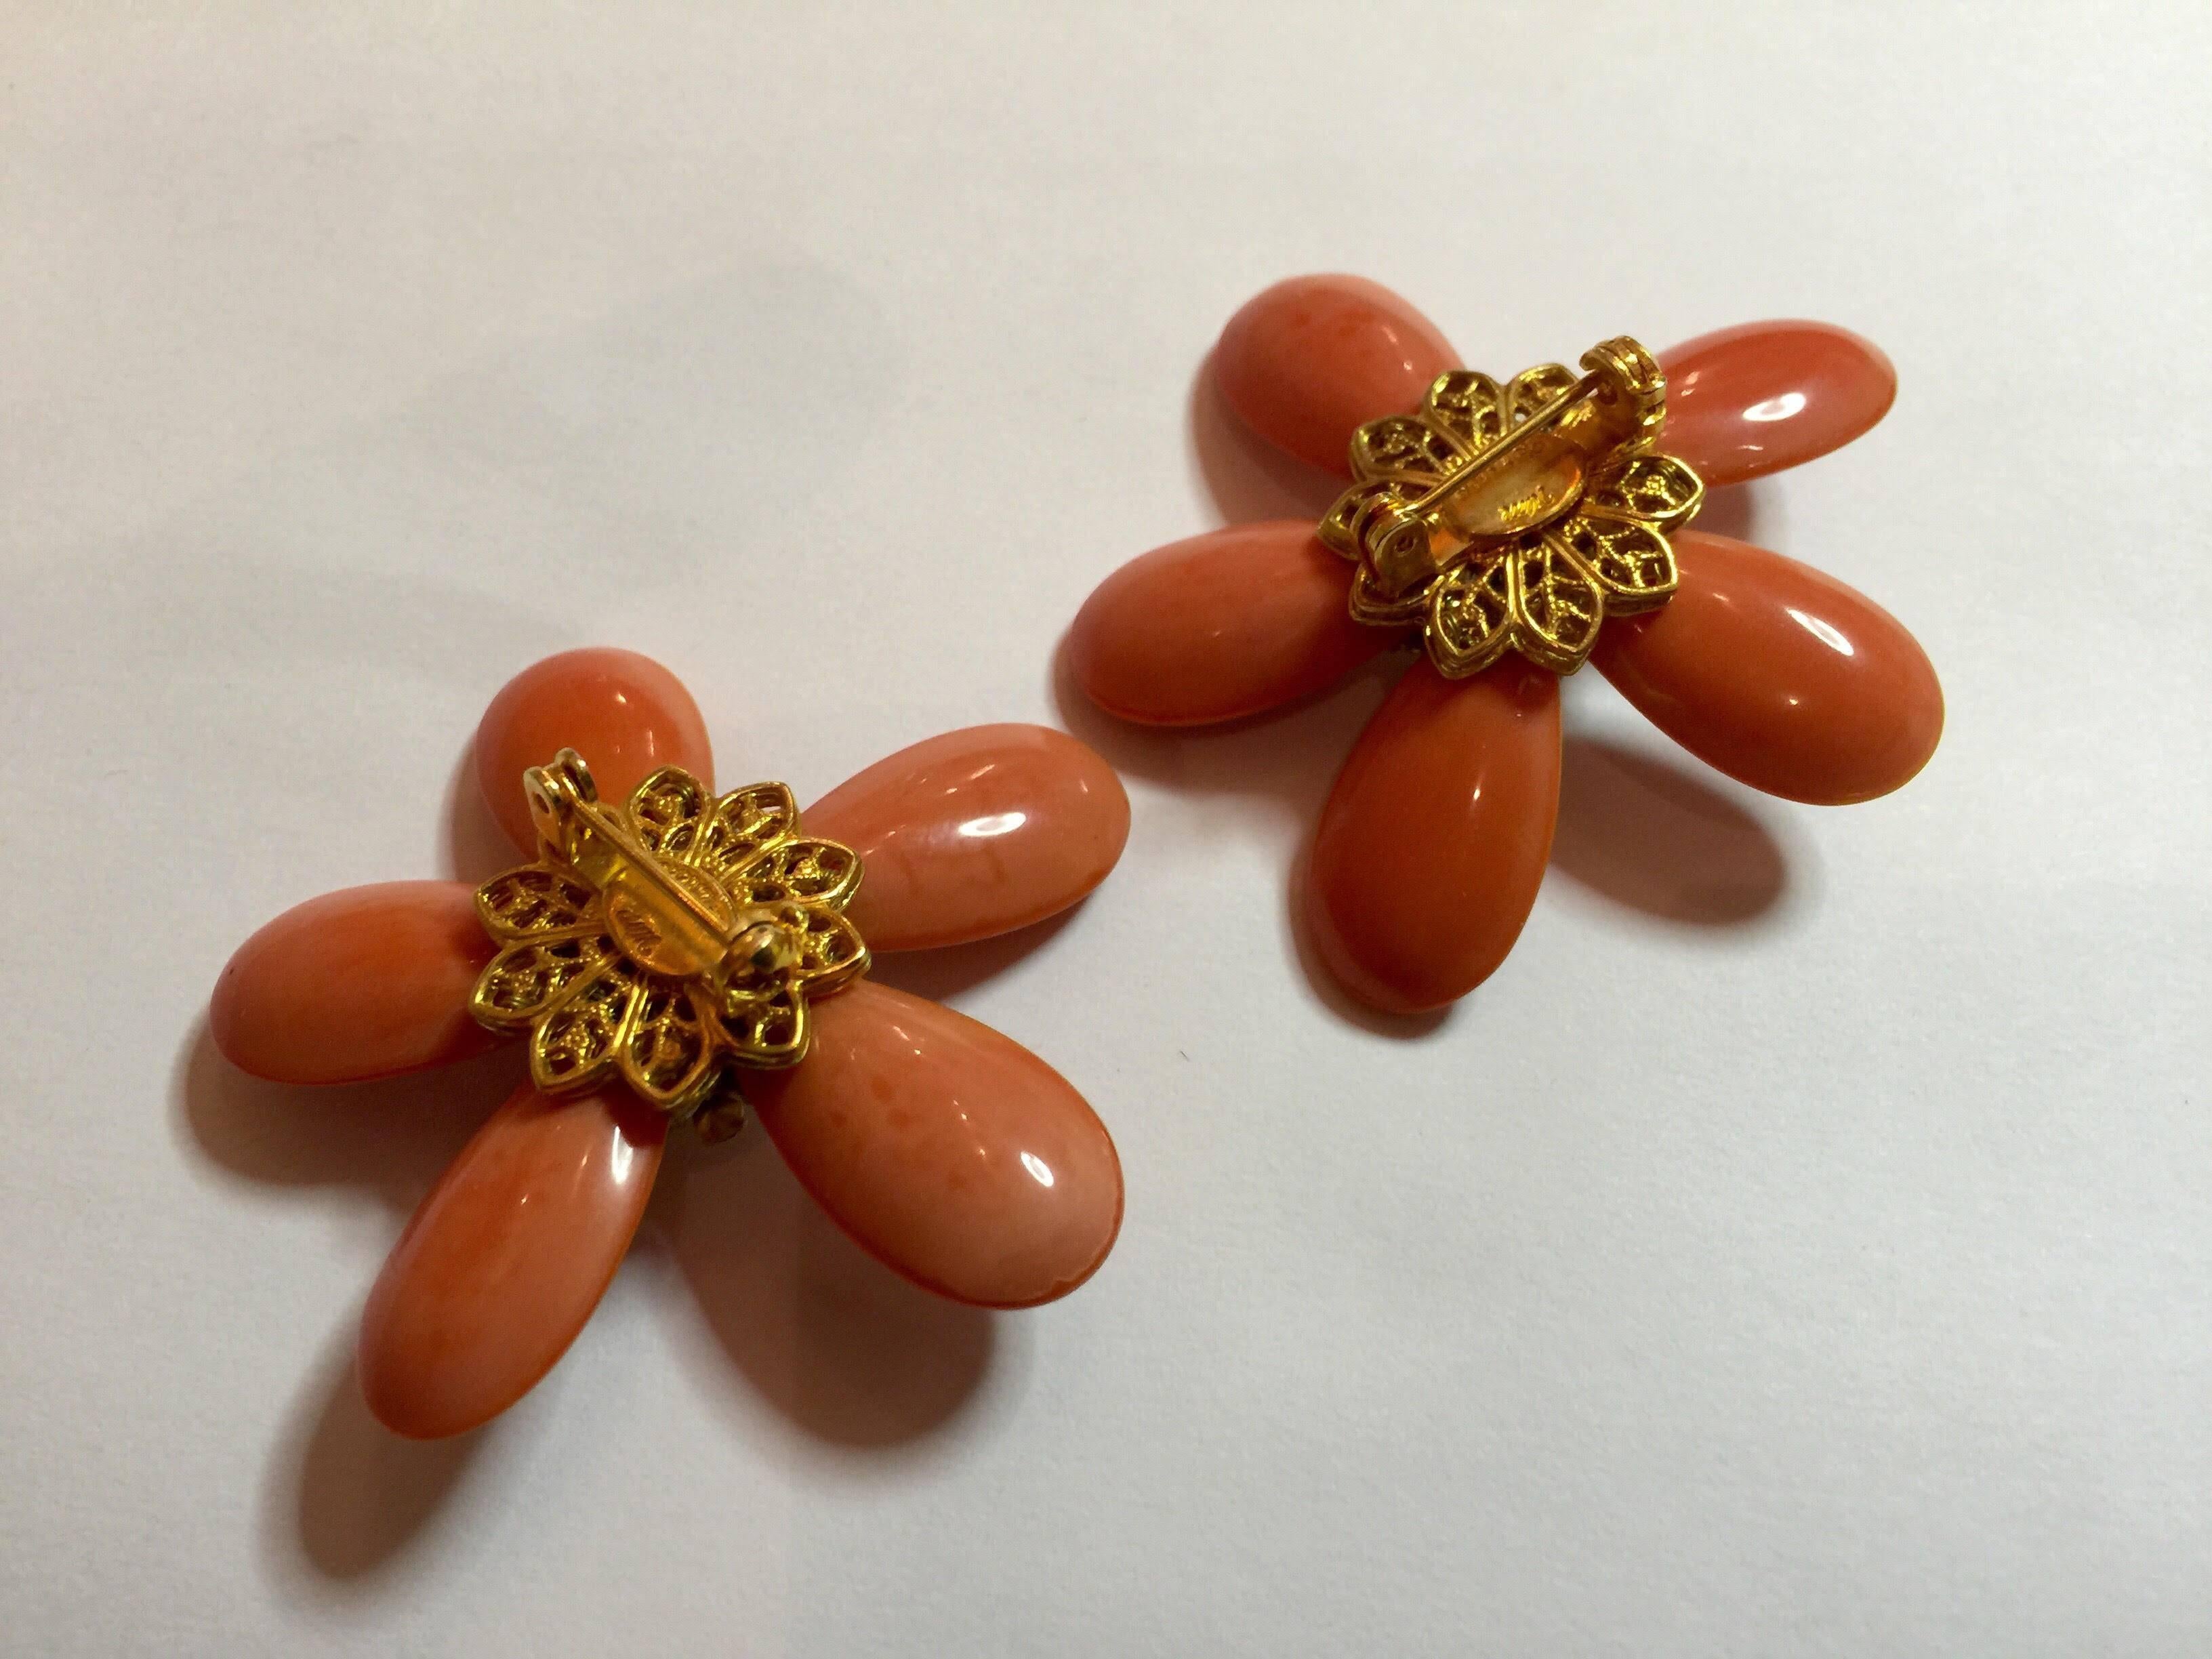 The noted jewelry designer William deLillo has a wealth of formats he works in to achieve glamour and elegance in his jewelry designs. This pair of flower pins, which ressemble star forms, are elegant and glmaorous in a way not dissimilar from